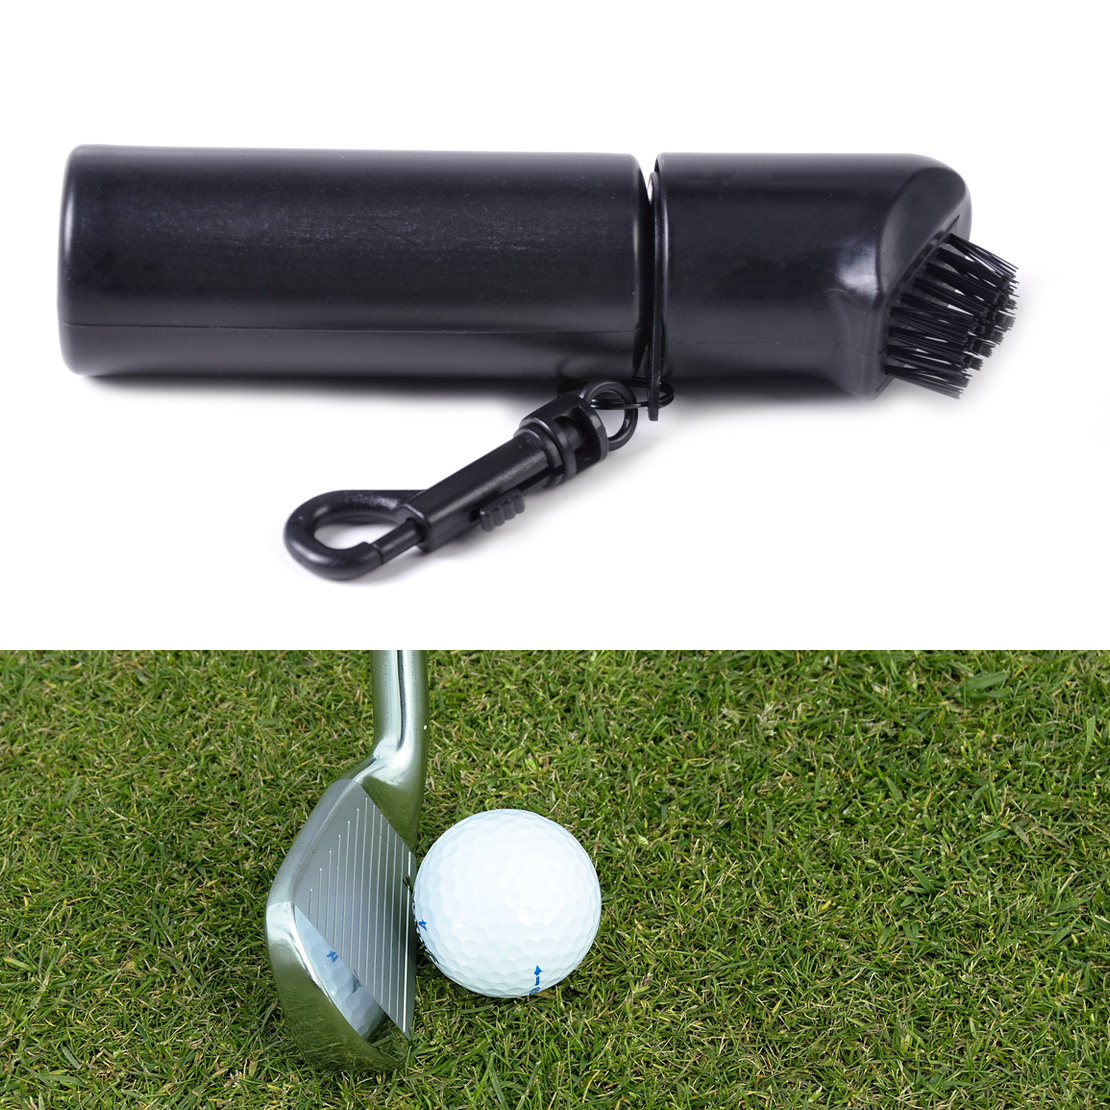 Black 150ml Golf Club Ball Cleaning Brush Washer Cleaner Clip + Water ...